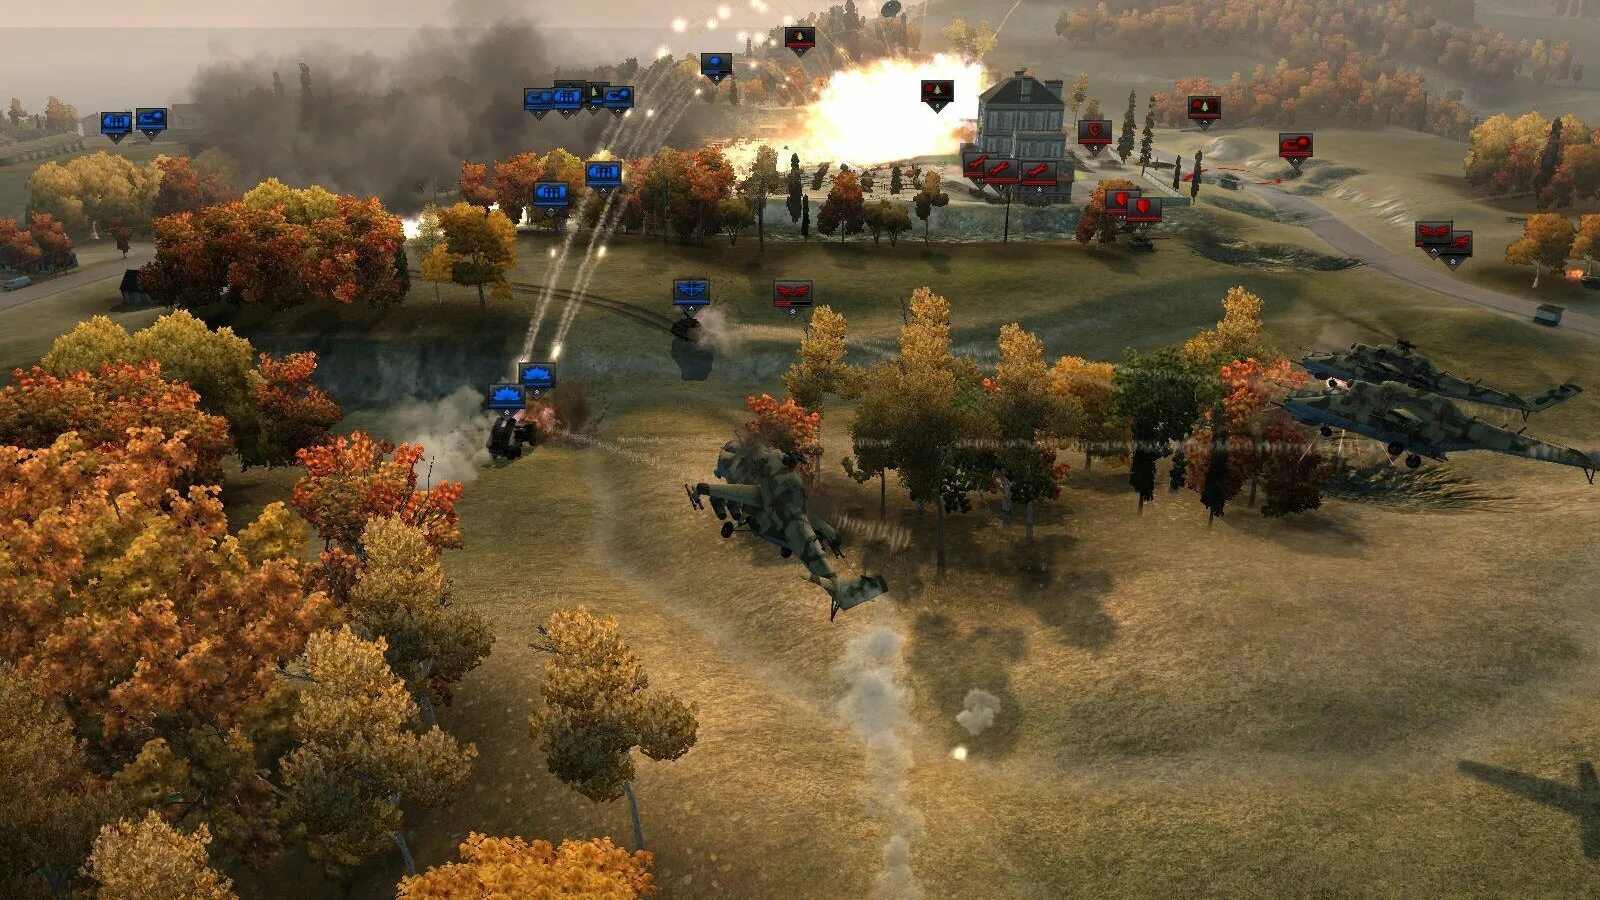 Ages of conflict full version. World in Conflict Скриншоты. World in Conflict НАТО. Мир в конфликте игра. World in Conflict похожие стратегии.